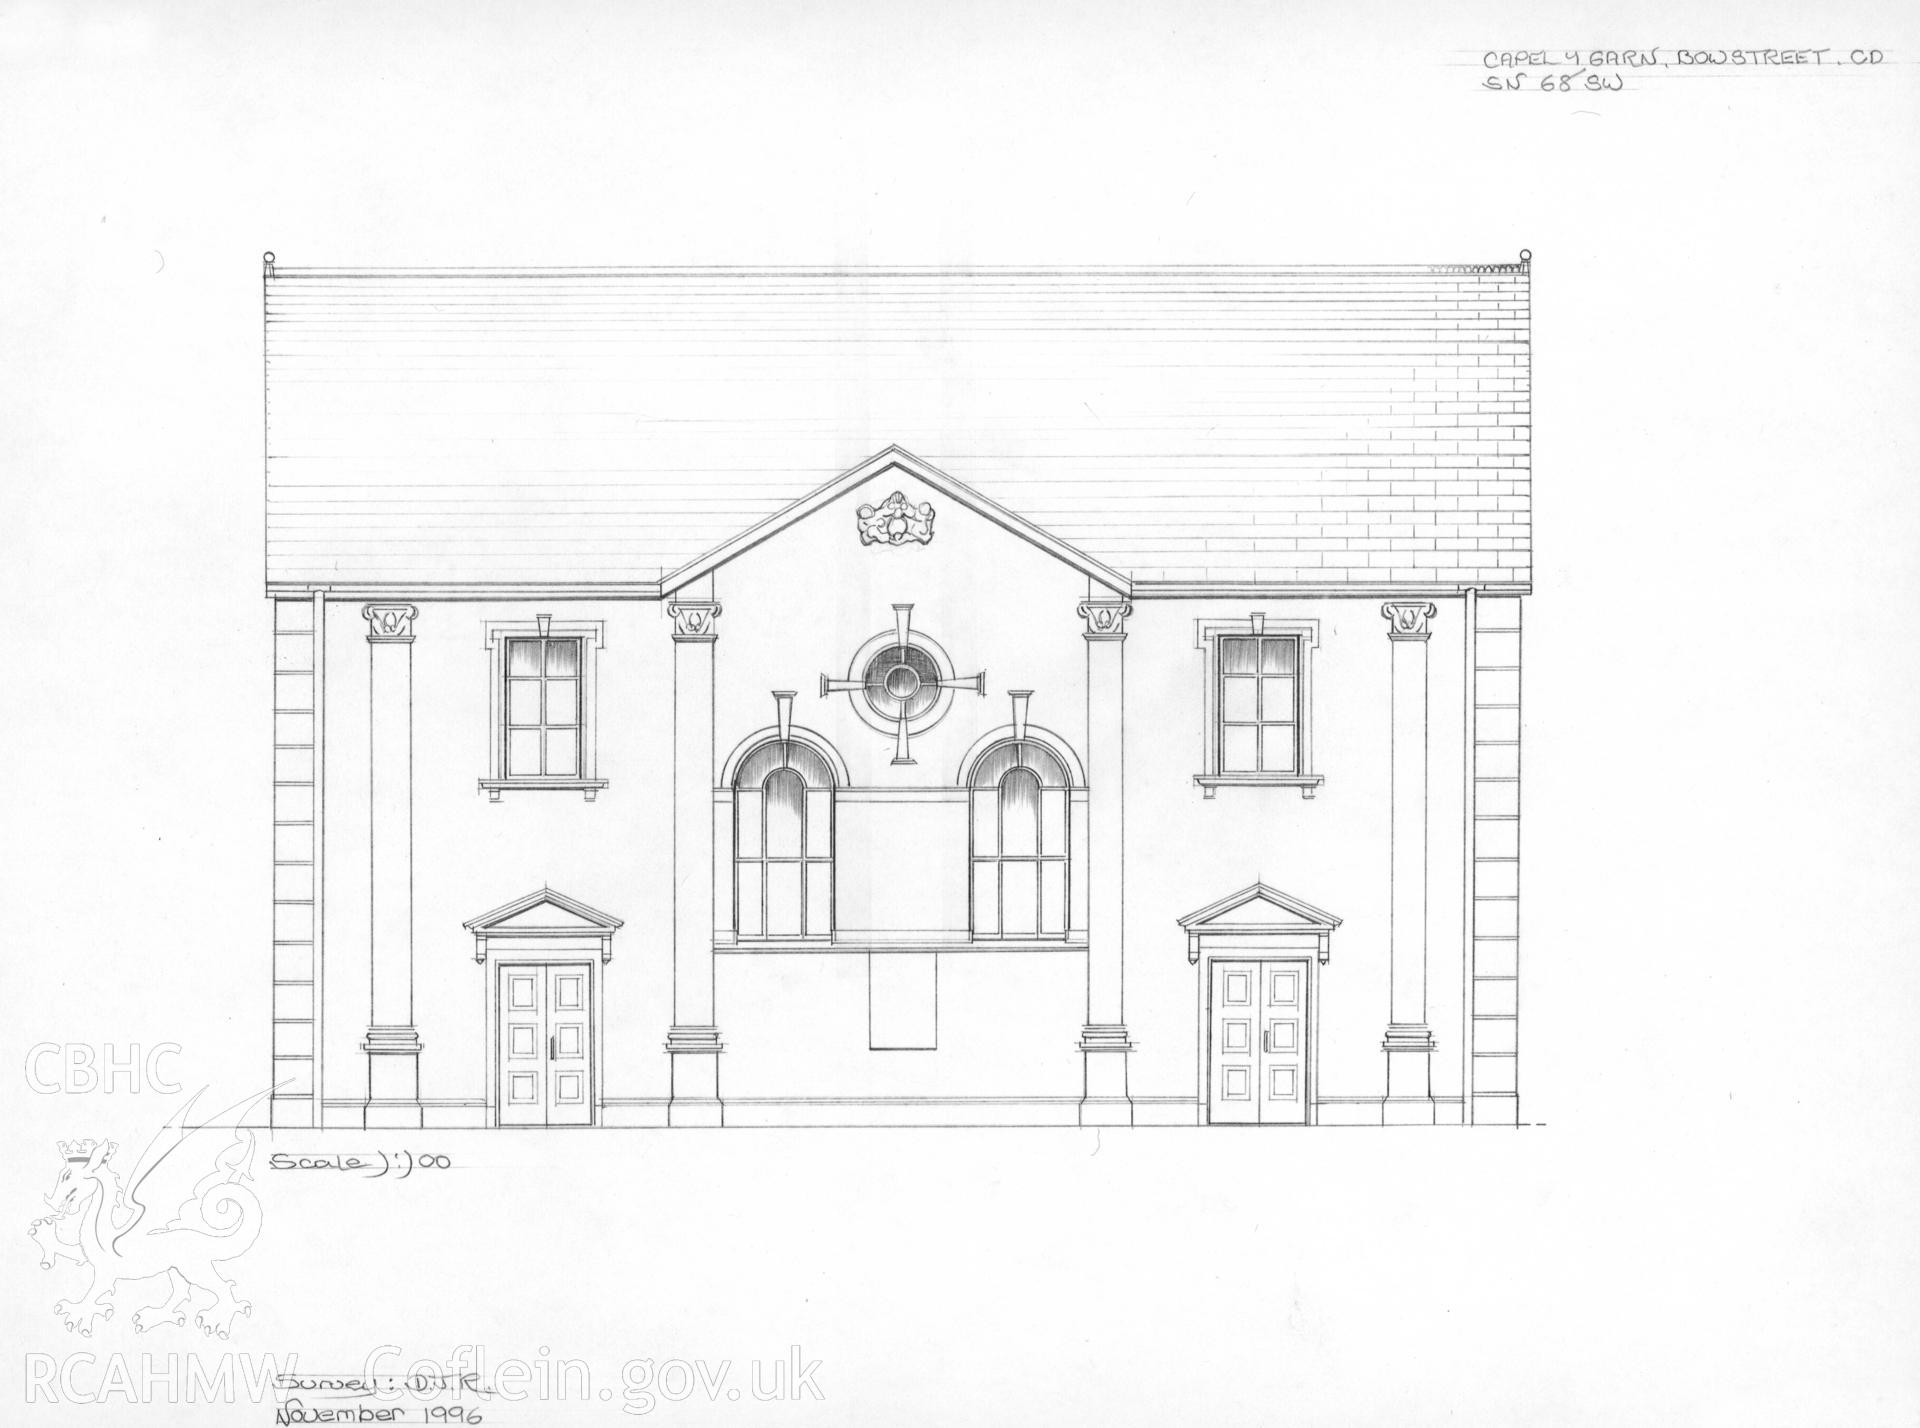 Pencil drawing showing elevation, by Dylan Roberts, dated November 1996.